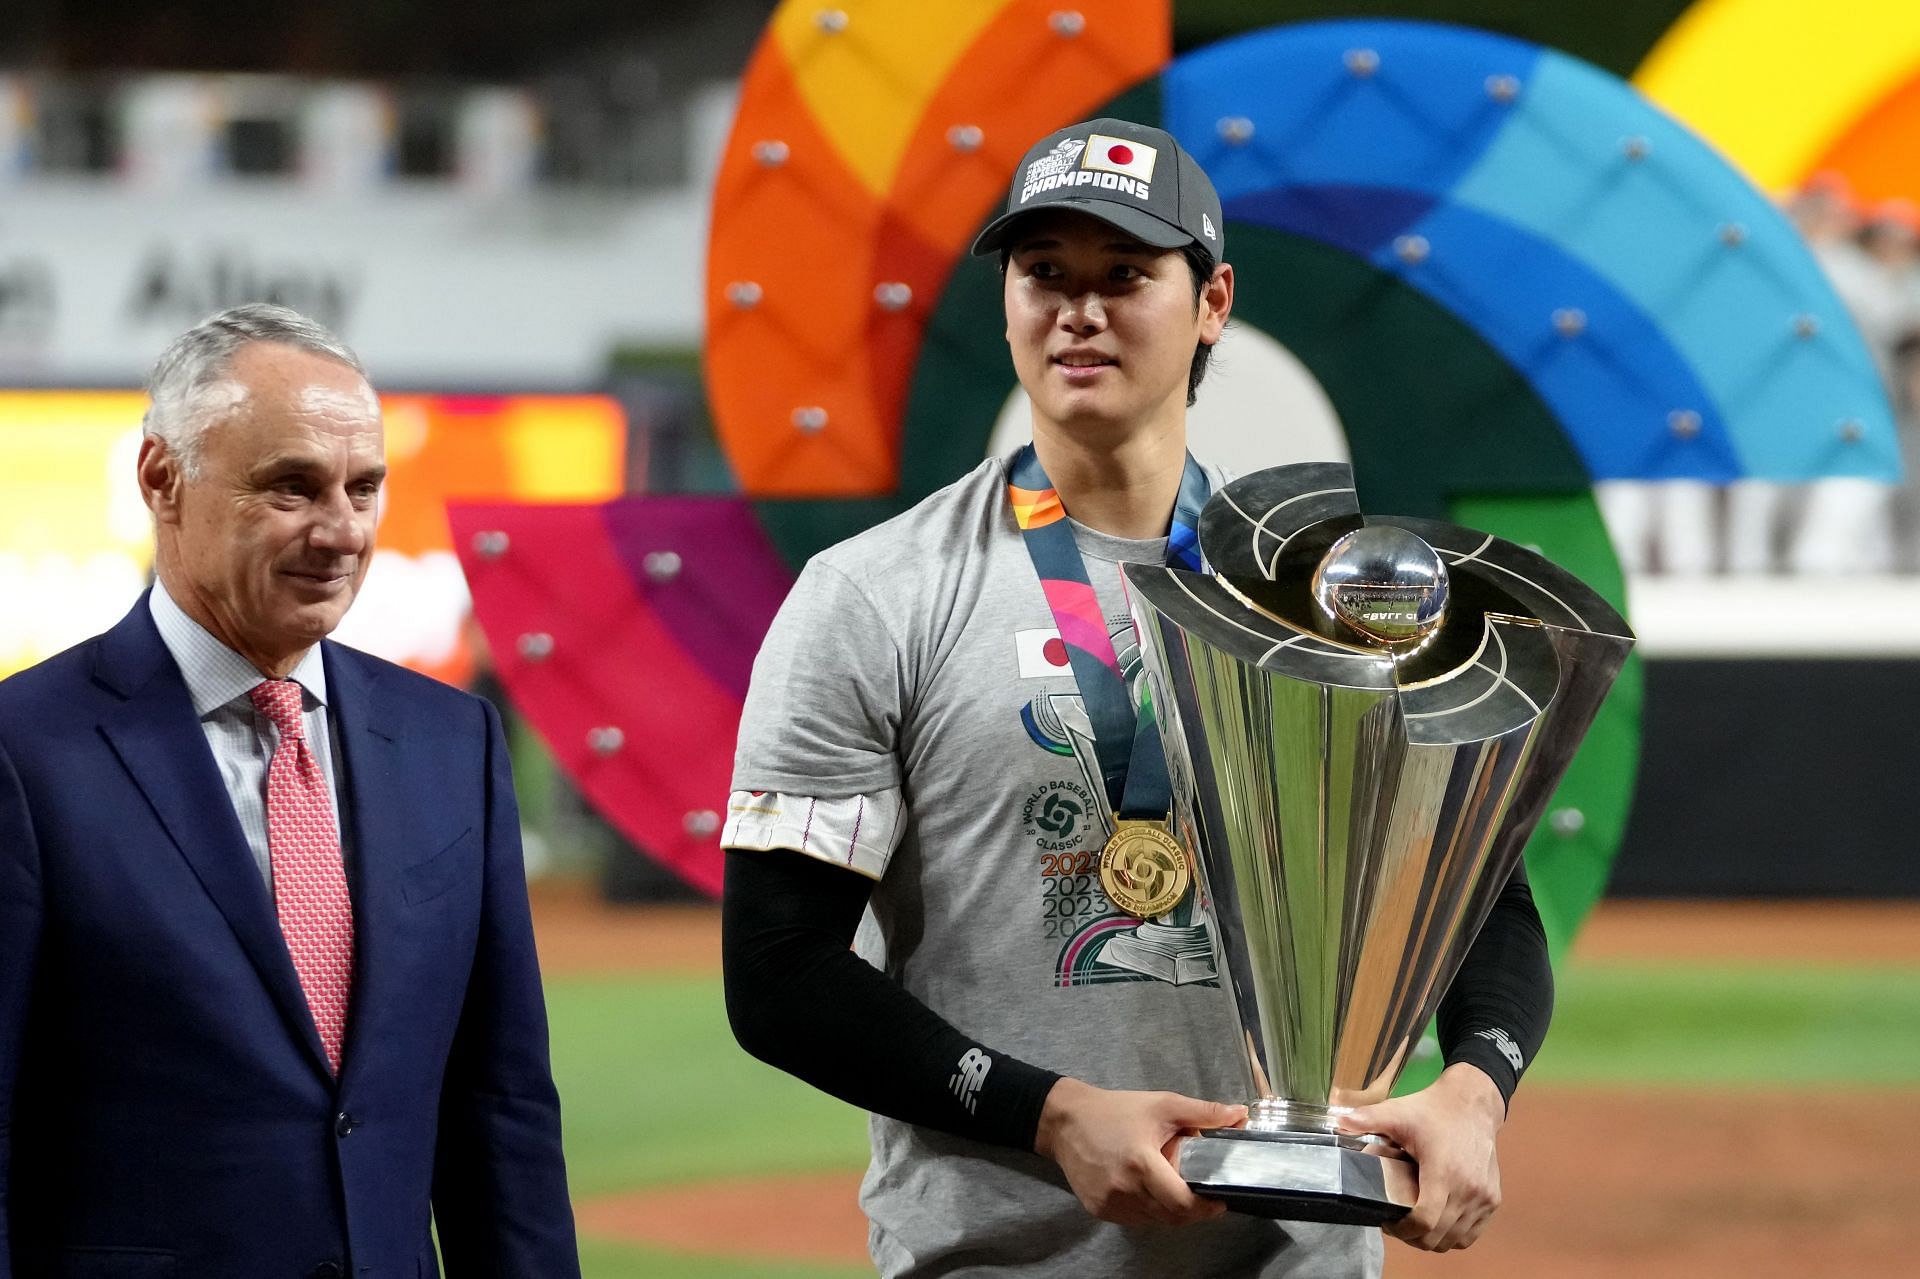 Shohei Ohtani of Team Japan is awarded the trophy by MLB commissioner Rob Manfred after defeating Team USA in the World Baseball Classic championship game.